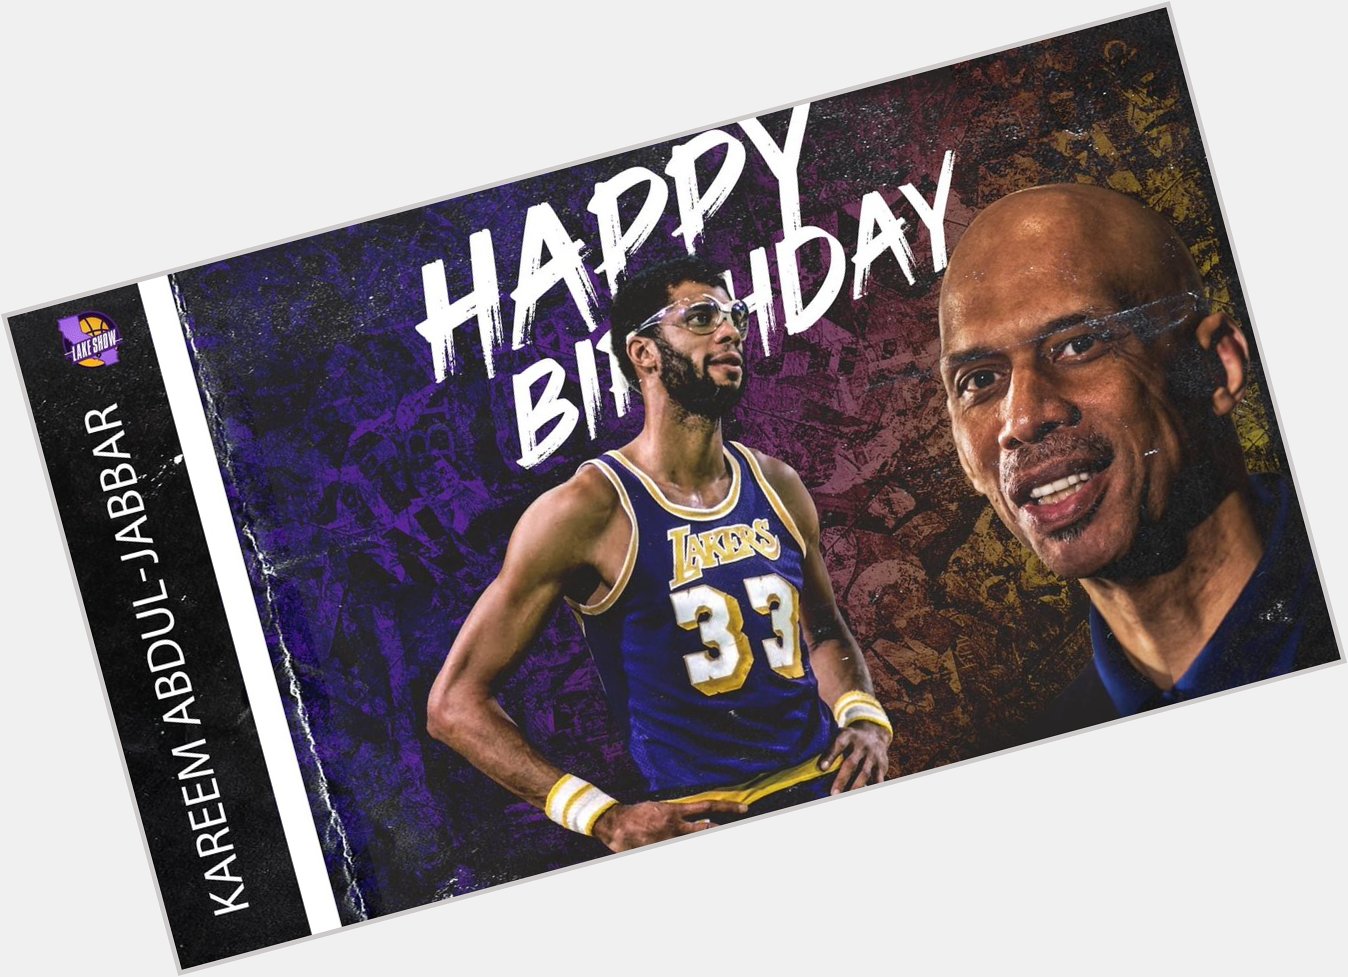 Happy Birthday
KAREEM ABDUL JABBAR
WON ON ALL LEVELS
GREATEST OF ALL-TIME
to many
73 years young! 